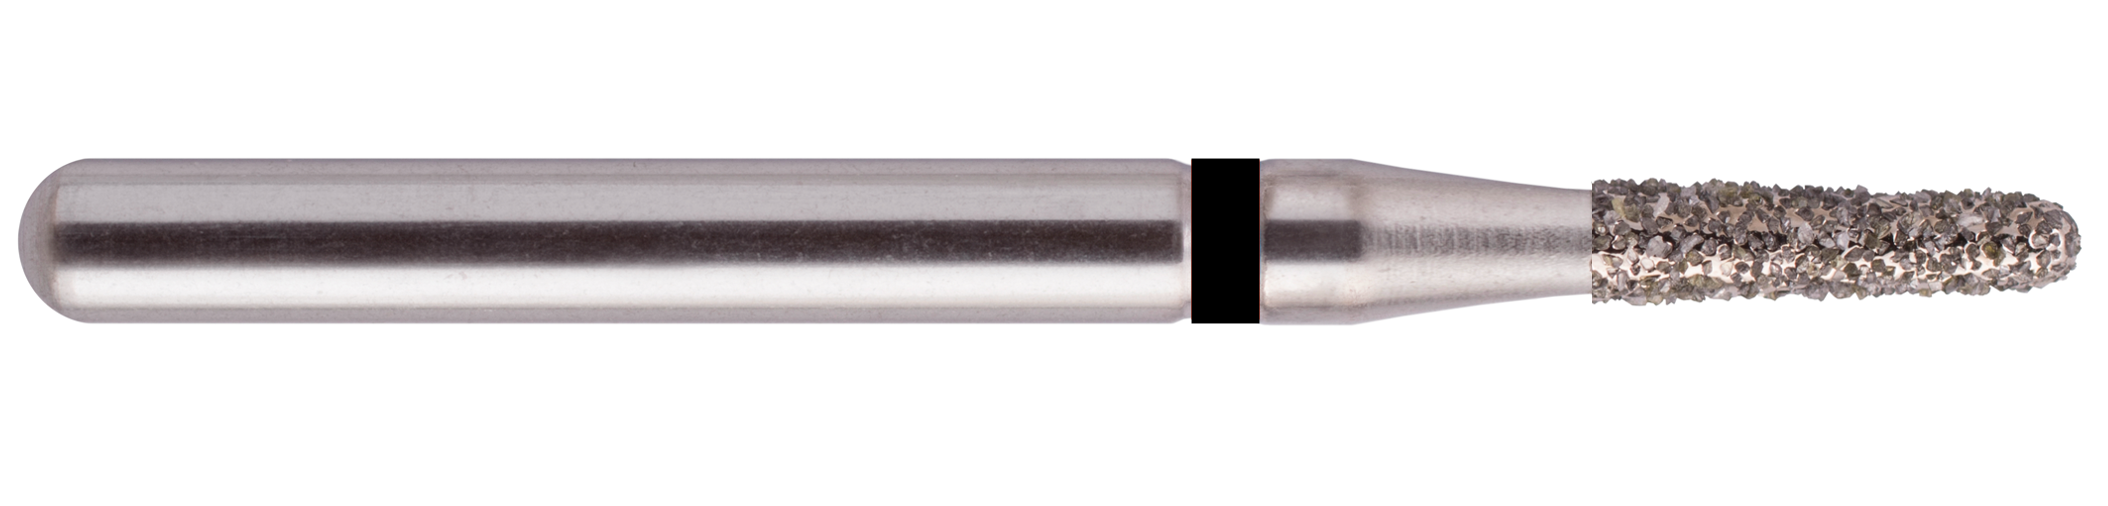 849 - Cone with rounded end